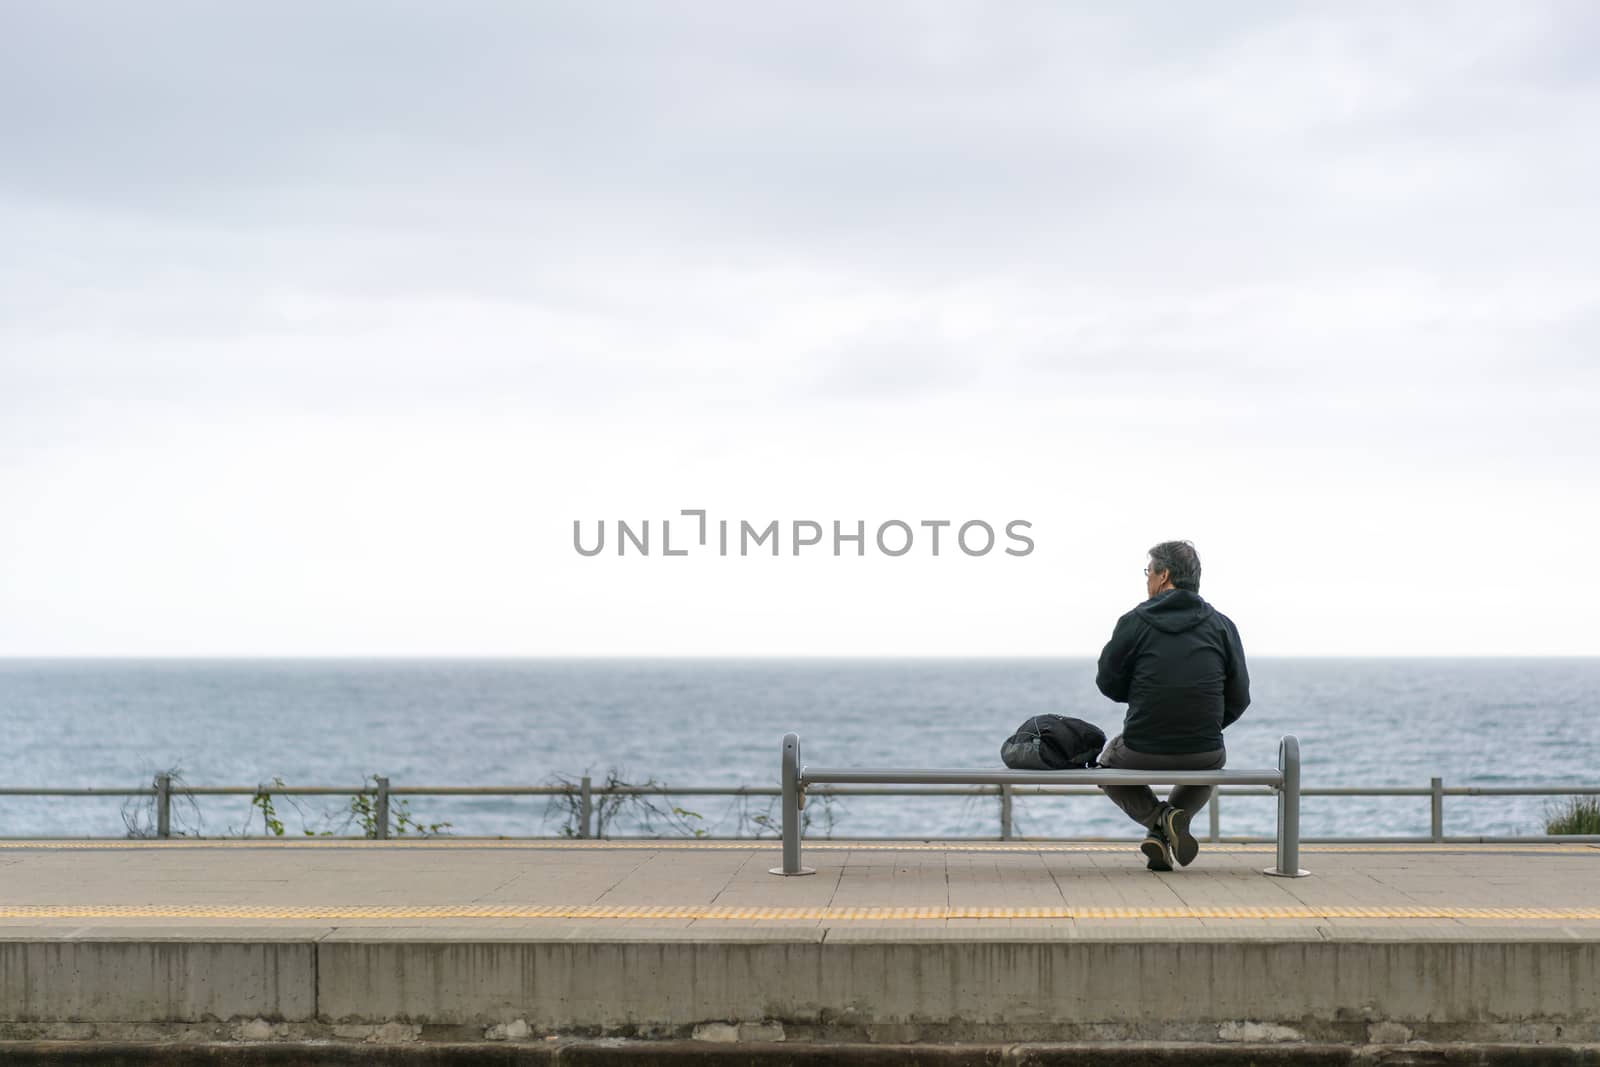 Corniglia, Italy - Apr 8, 2016: Unidentified backpacker old man tourist wait for train by the ocean with gloomy sky background, looking at copy space, at Corniglia train station, Cinque Terre, Italy